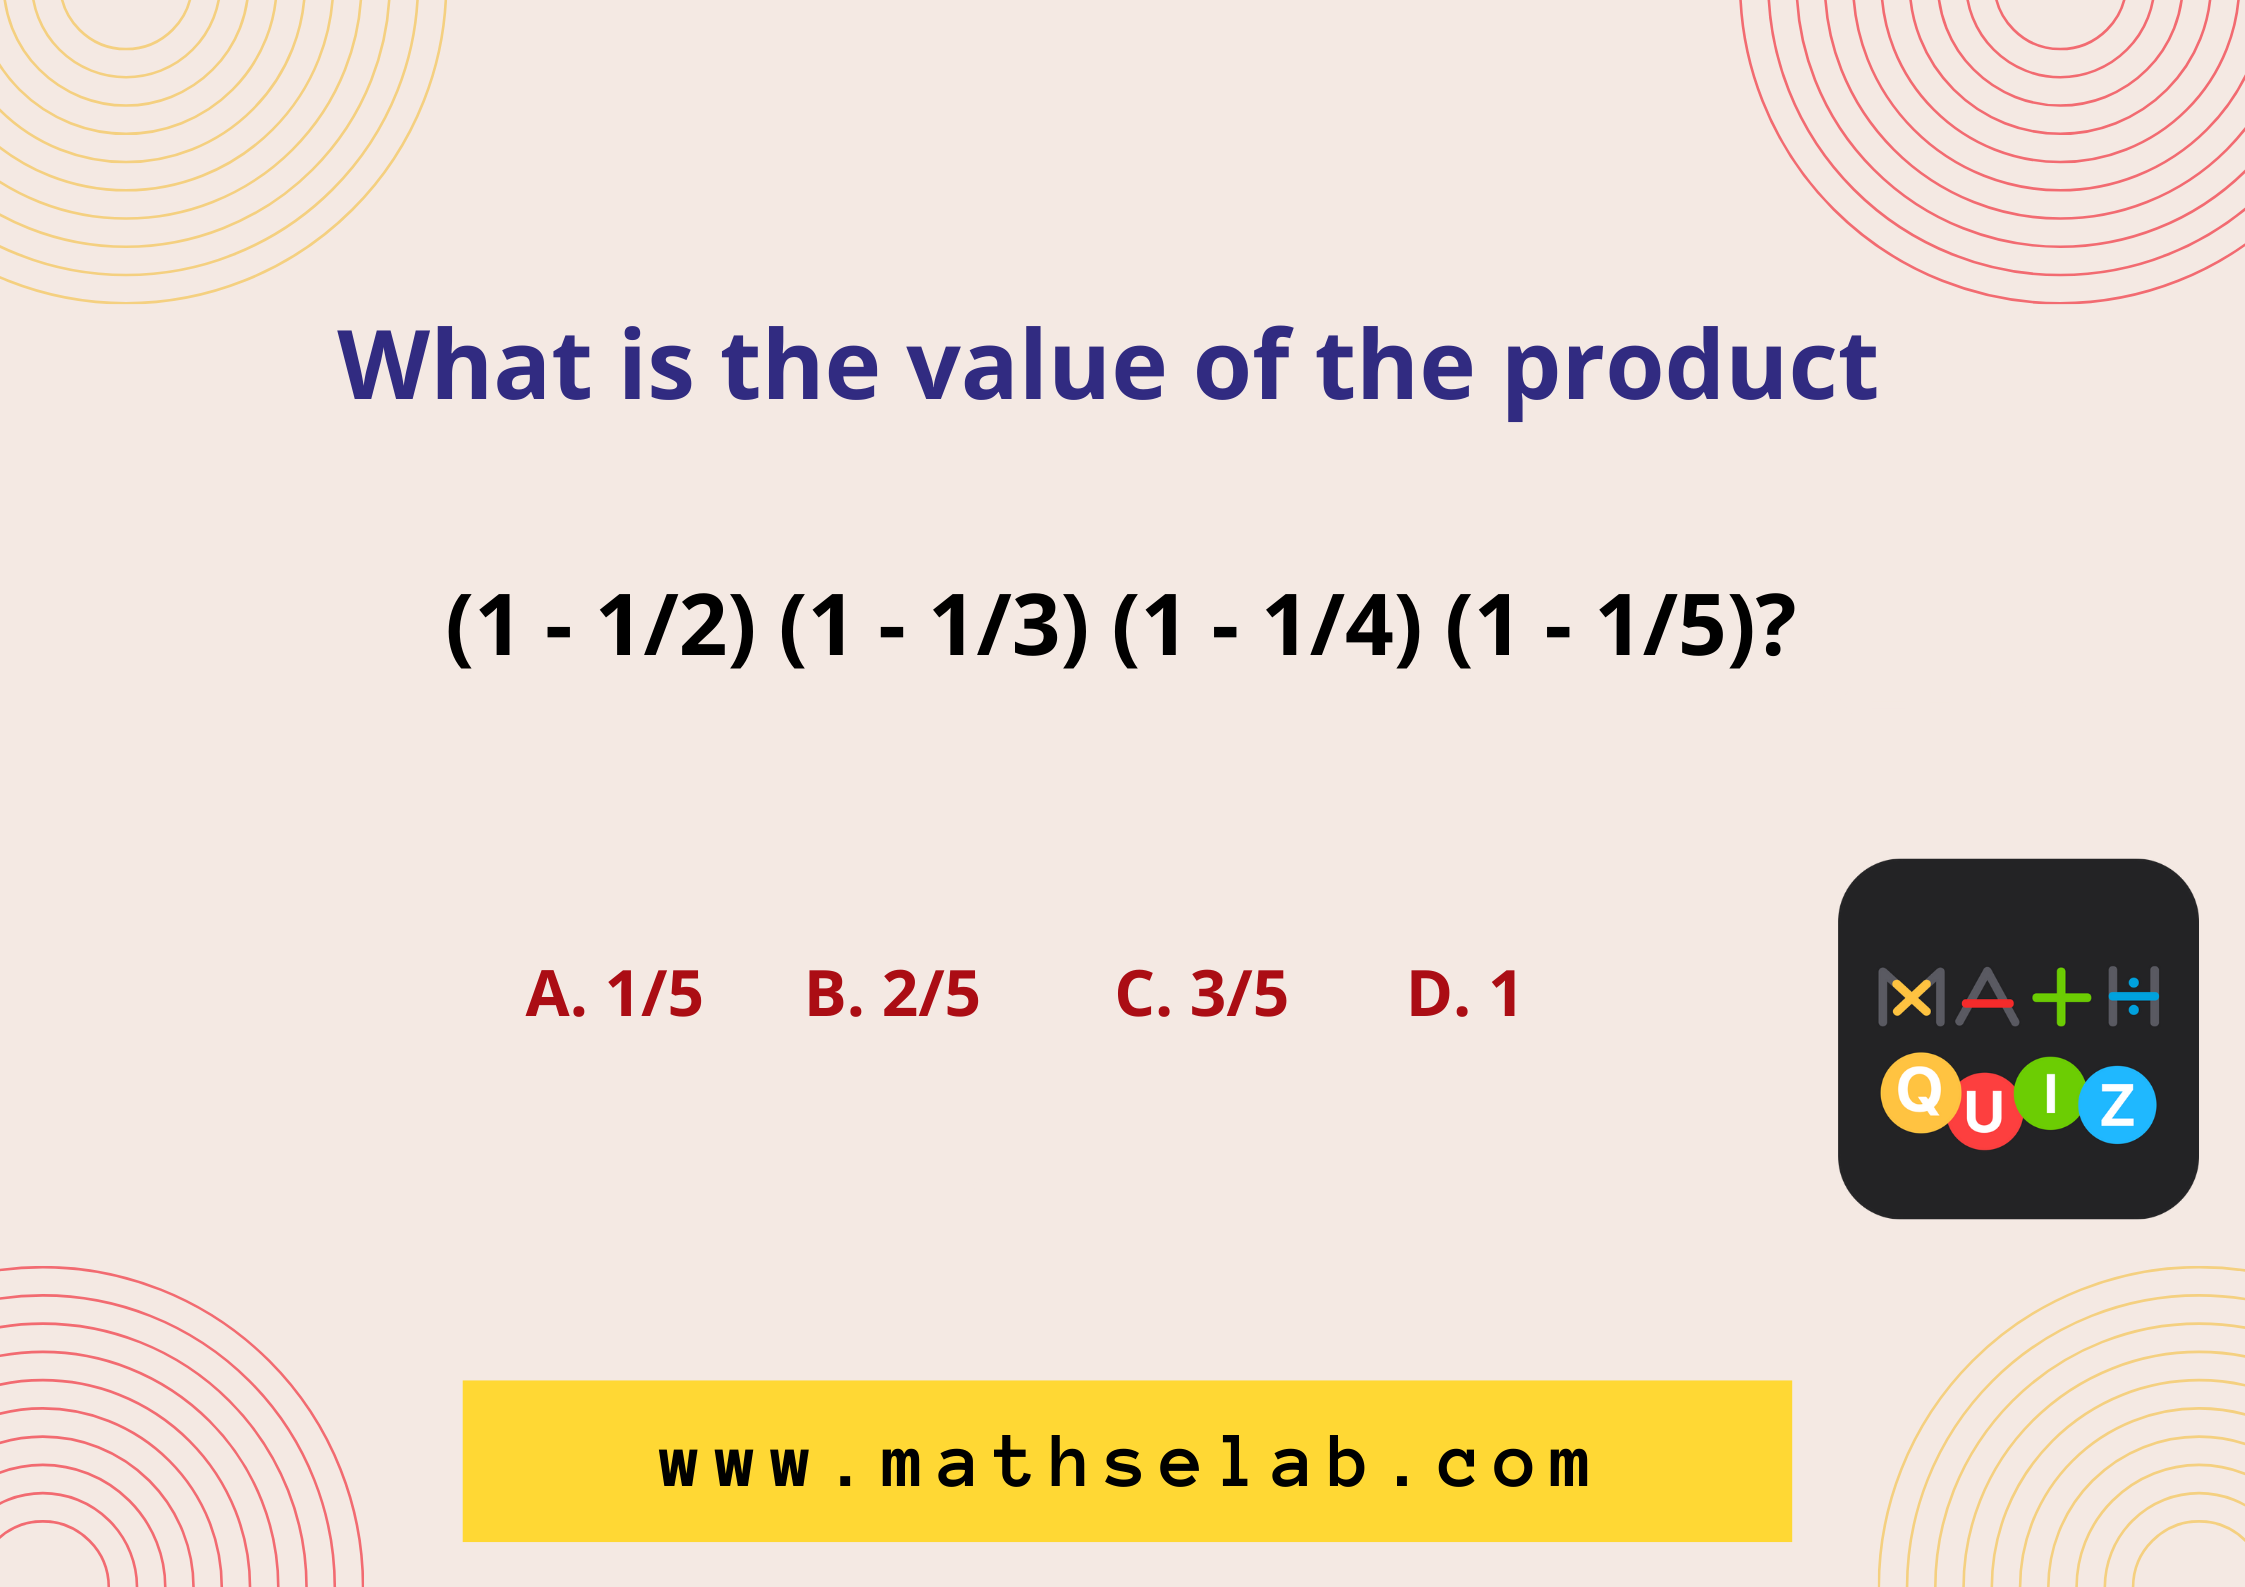 What is the value of the product (1 - 12) (1 - 13) (1 - 14) (1 - 15) - mathselab.com